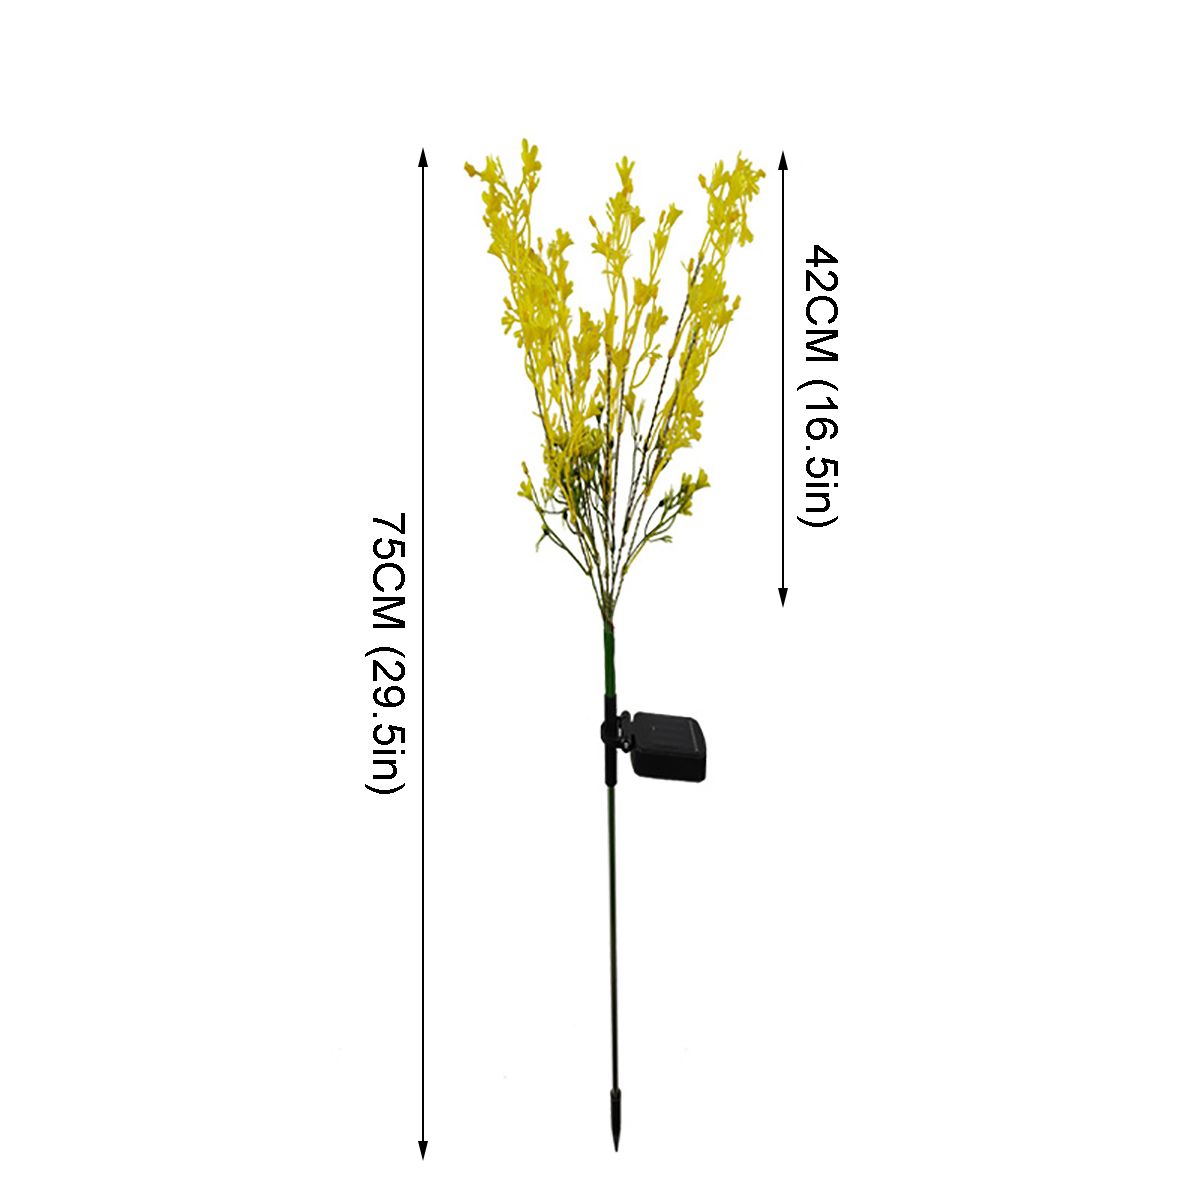 Outdoor-Solar-Powered-LED-Canola-Flowers-Lawn-Light-Waterproof-Garden-Lamp-Home-Decoration-1712934